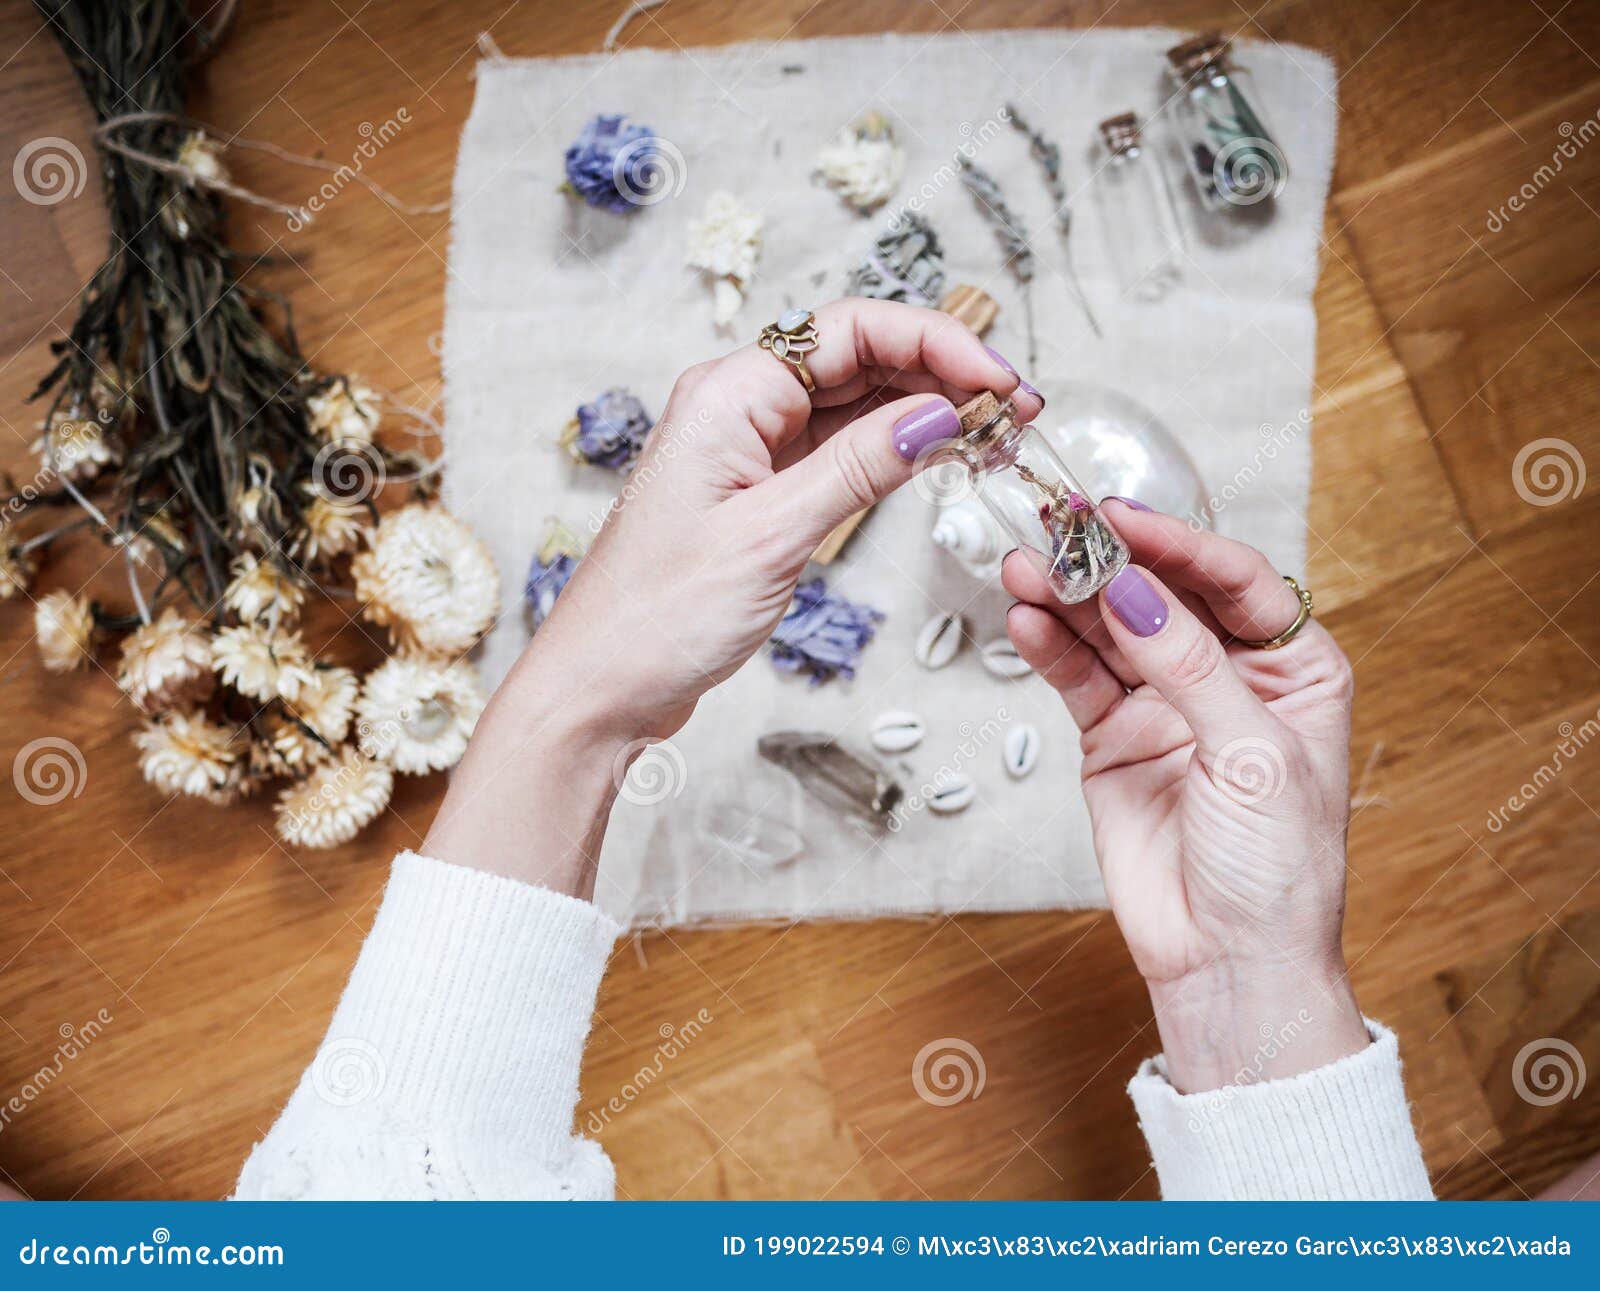 a girl is holding a little glass jar  on her altar in lavender tones